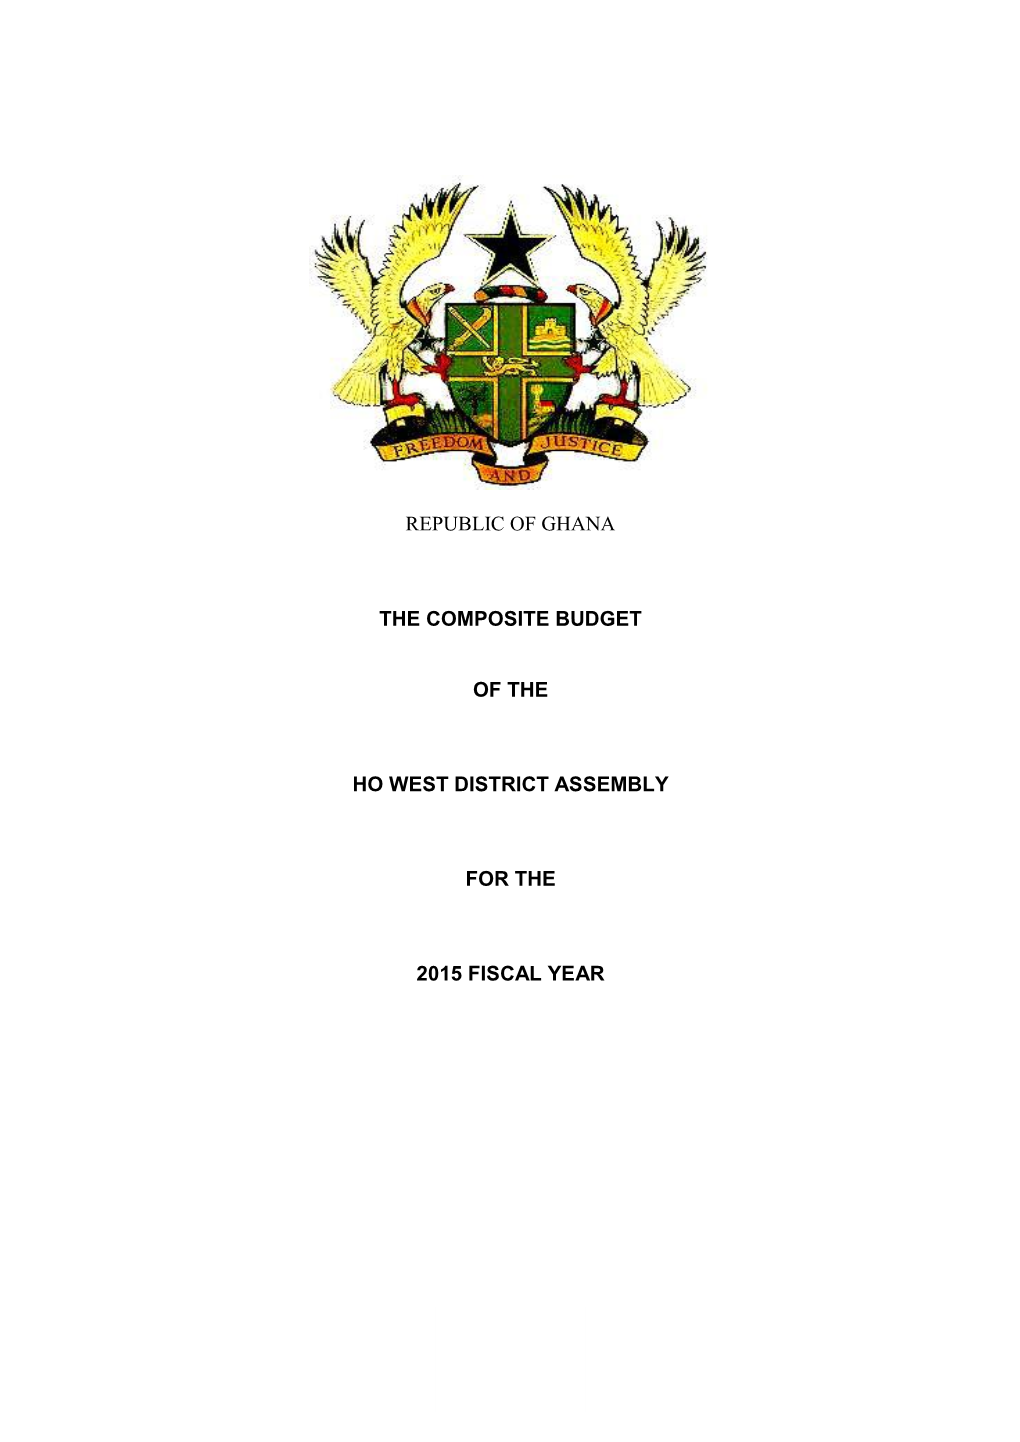 Republic of Ghana the Composite Budget of the Ho West District